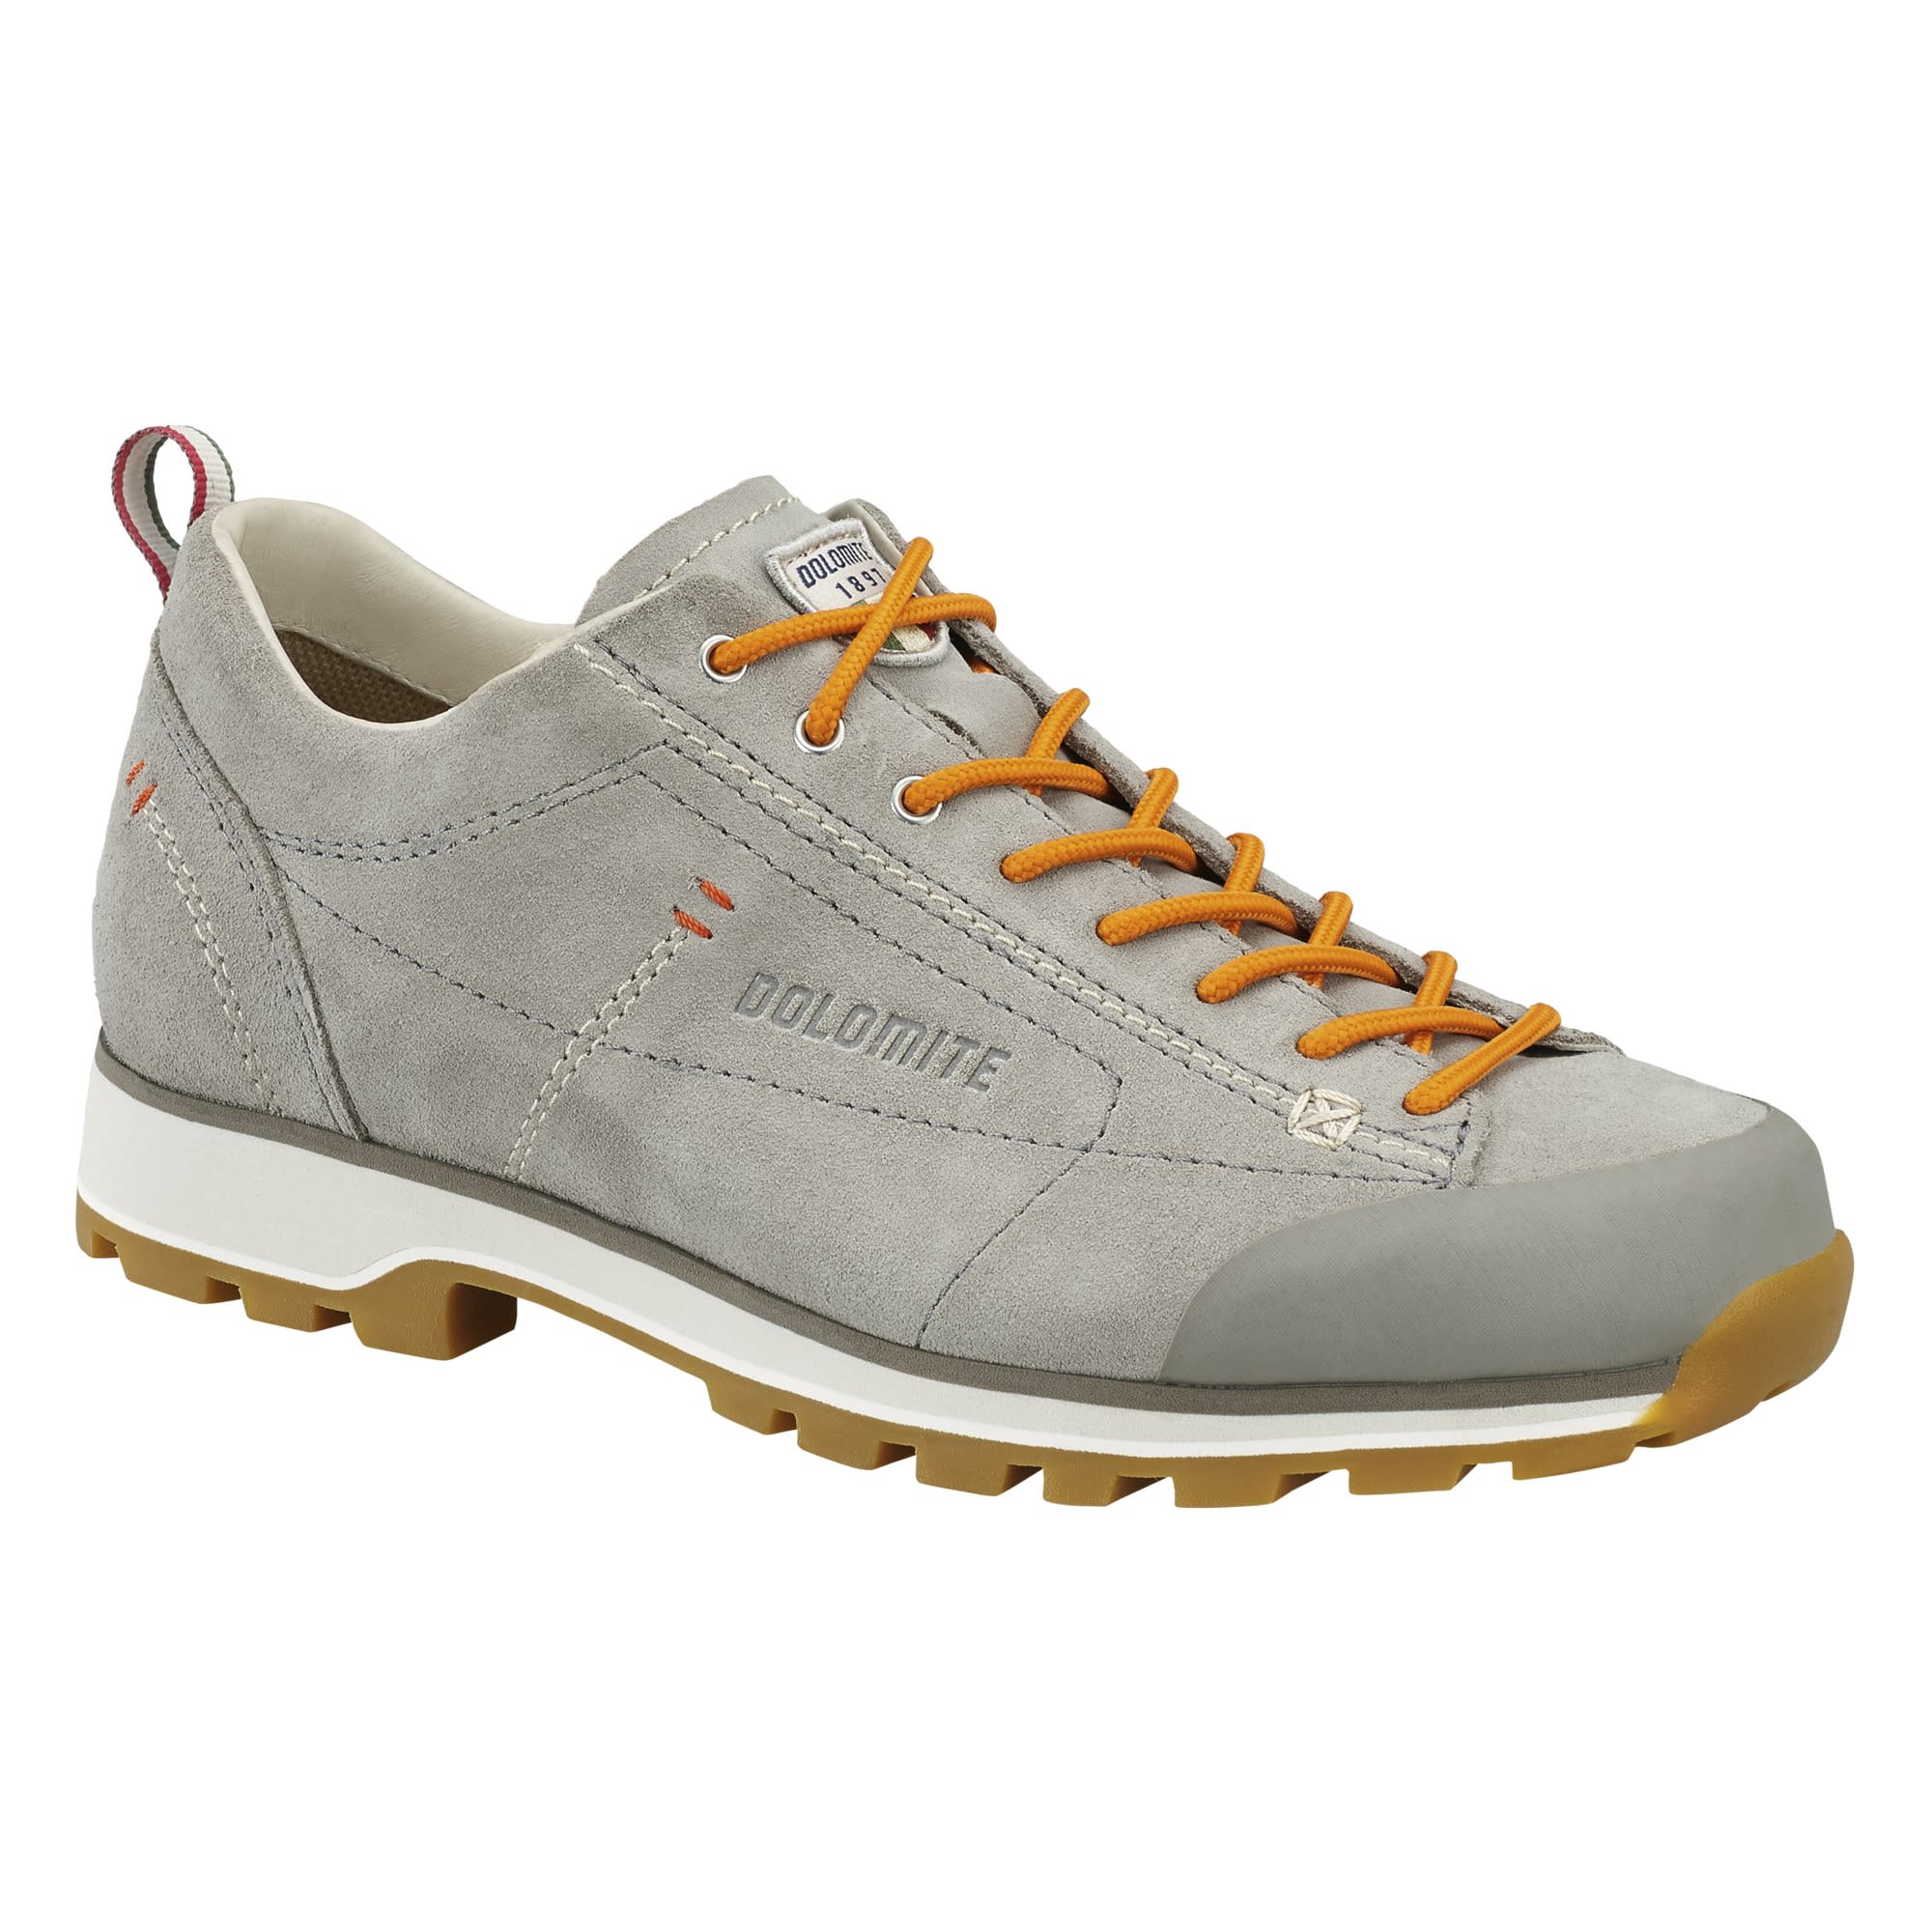 Buy Dolomite 54 Low Women's from Outnorth